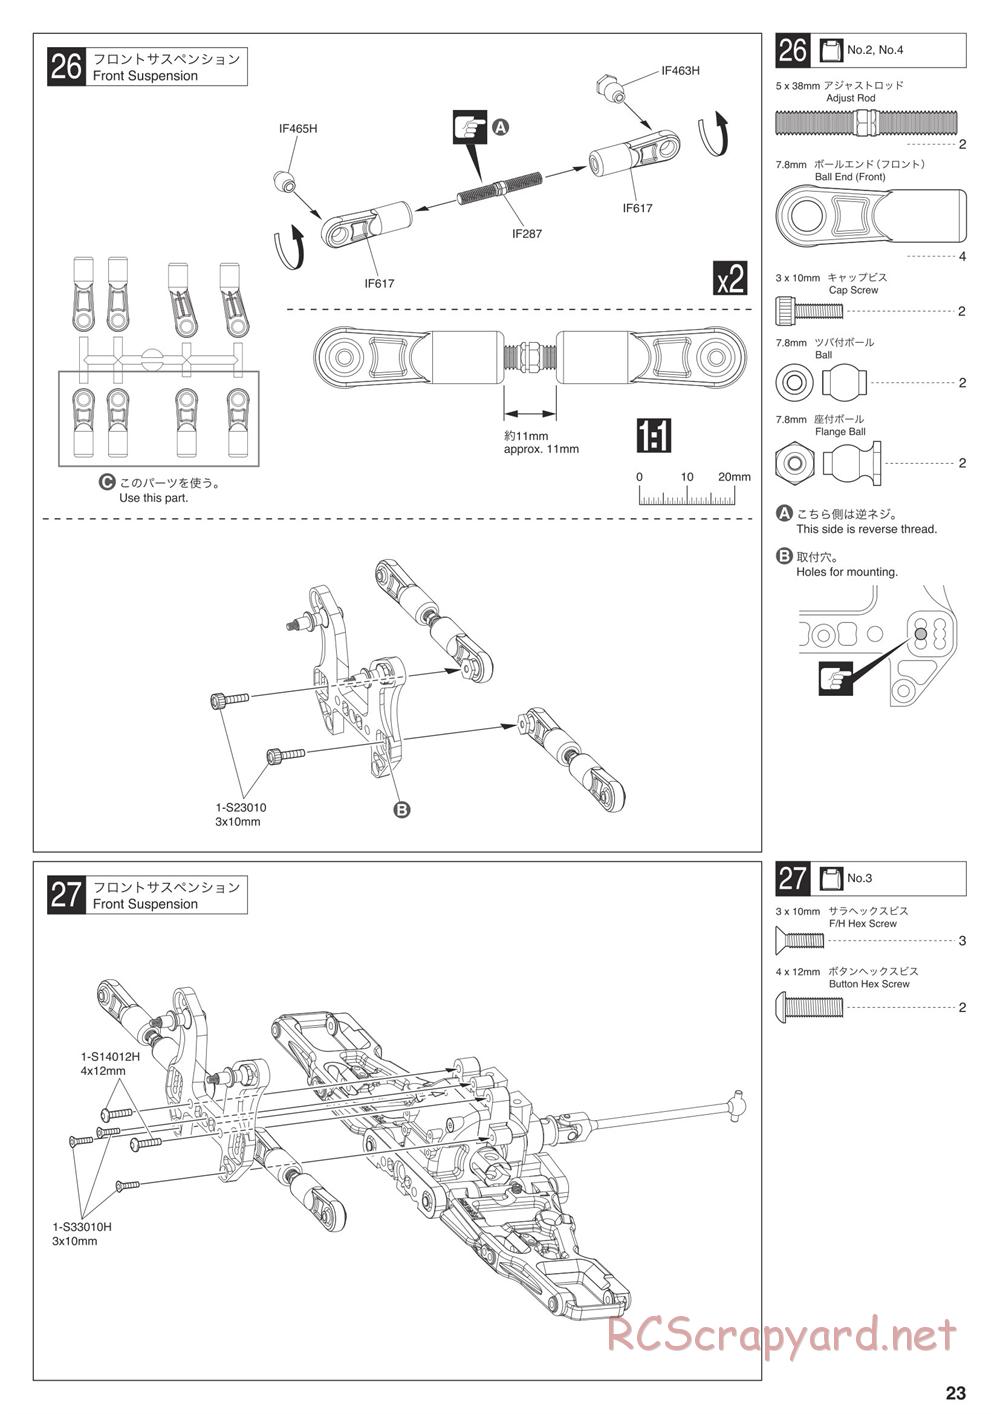 Kyosho - Inferno MP10 - Manual - Page 23